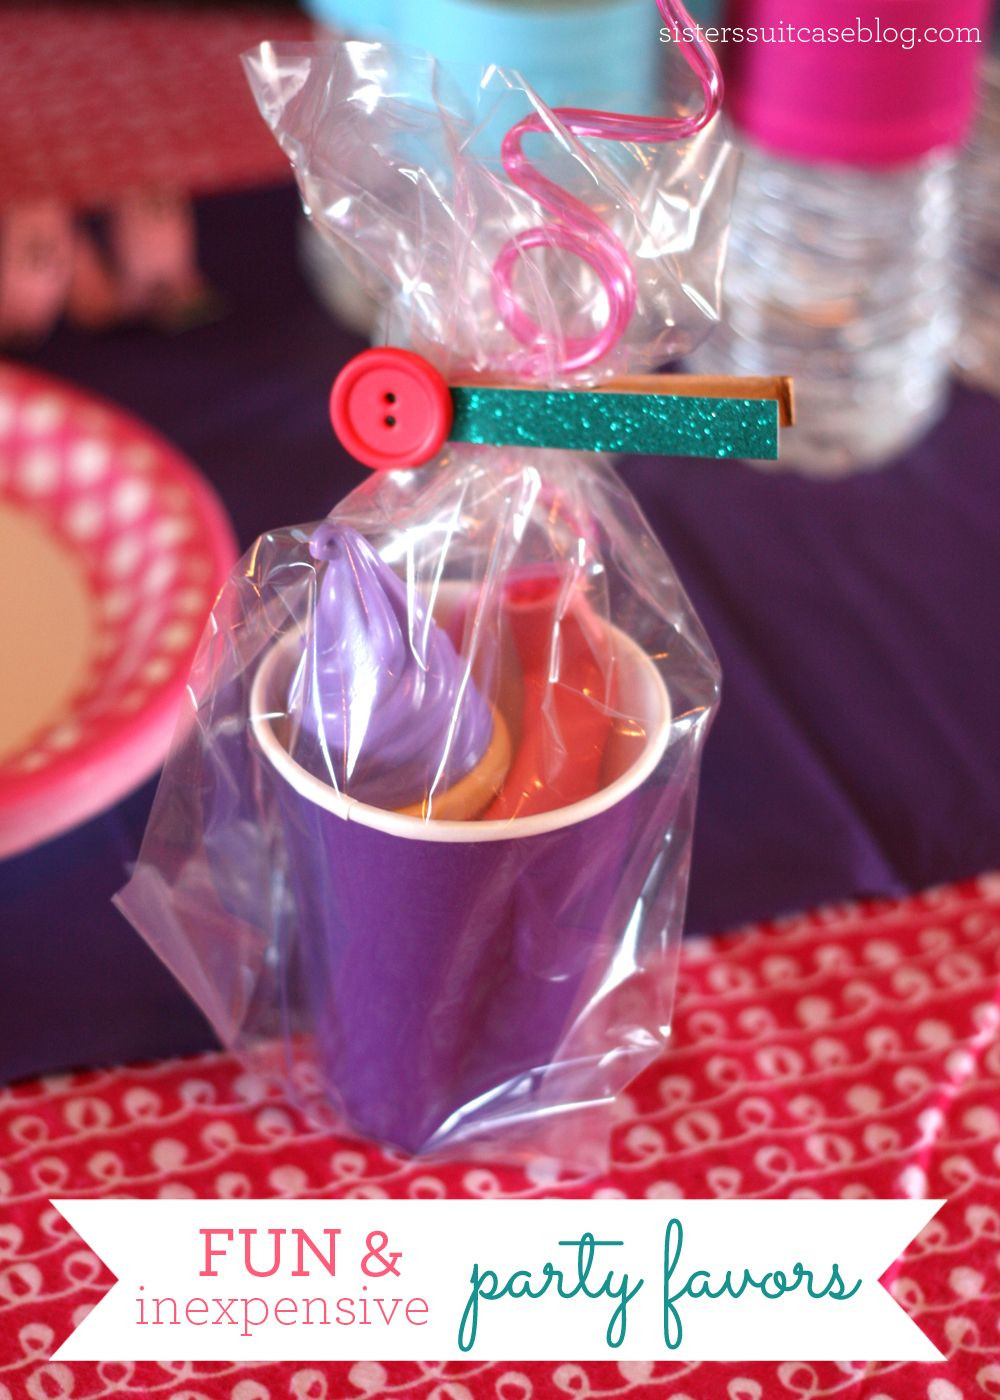 Party Favors Ideas For Kids
 LaLaLoopsy Birthday Party Ideas a BUDGET